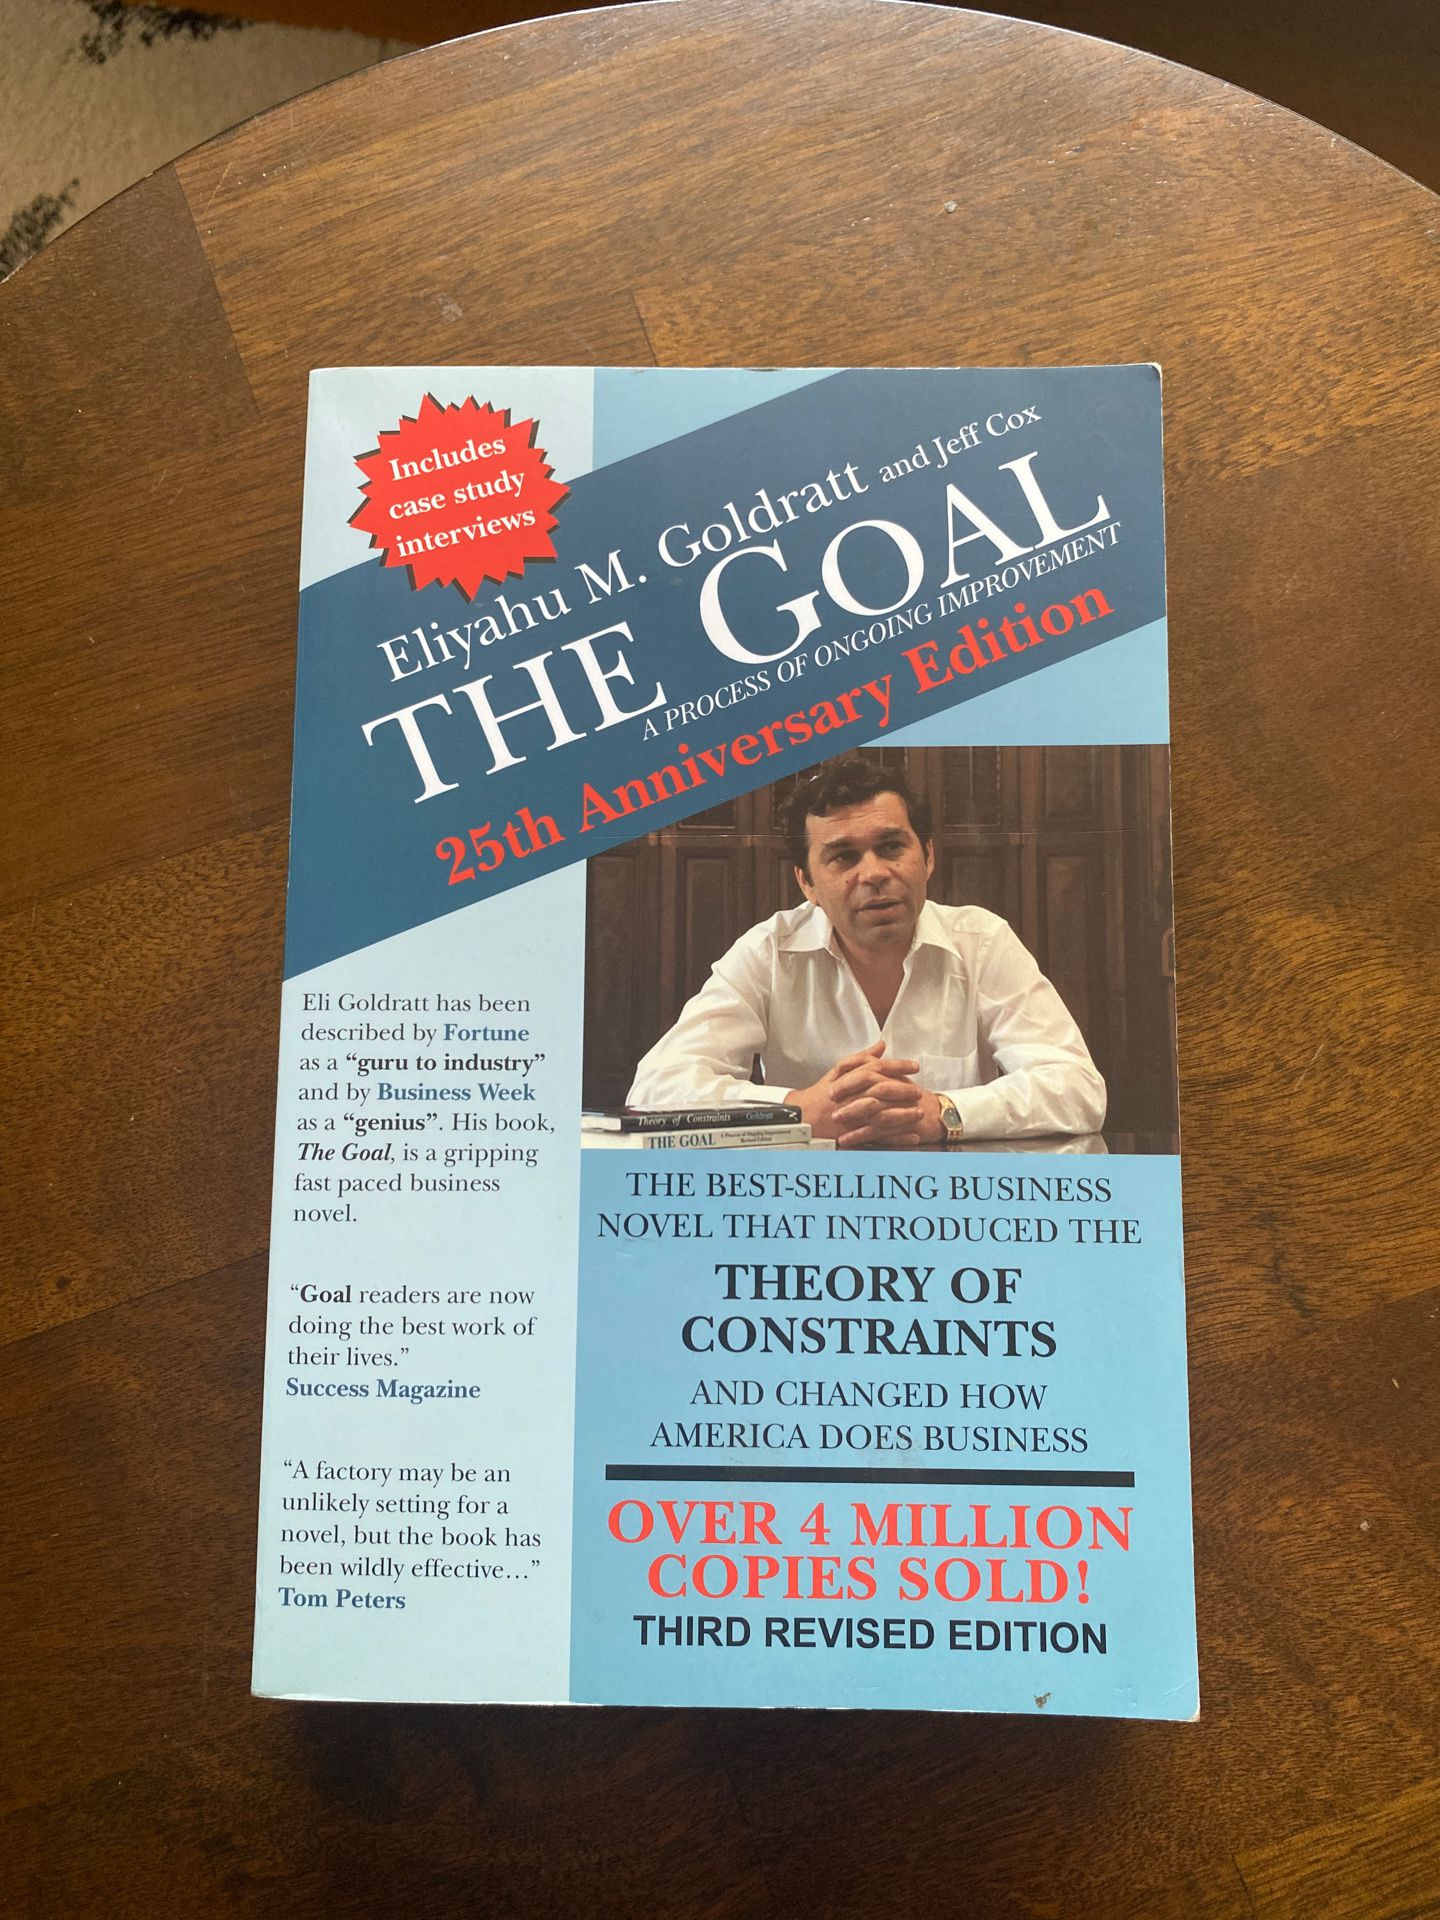 The Goal, a business book that introduces the theory of constraints